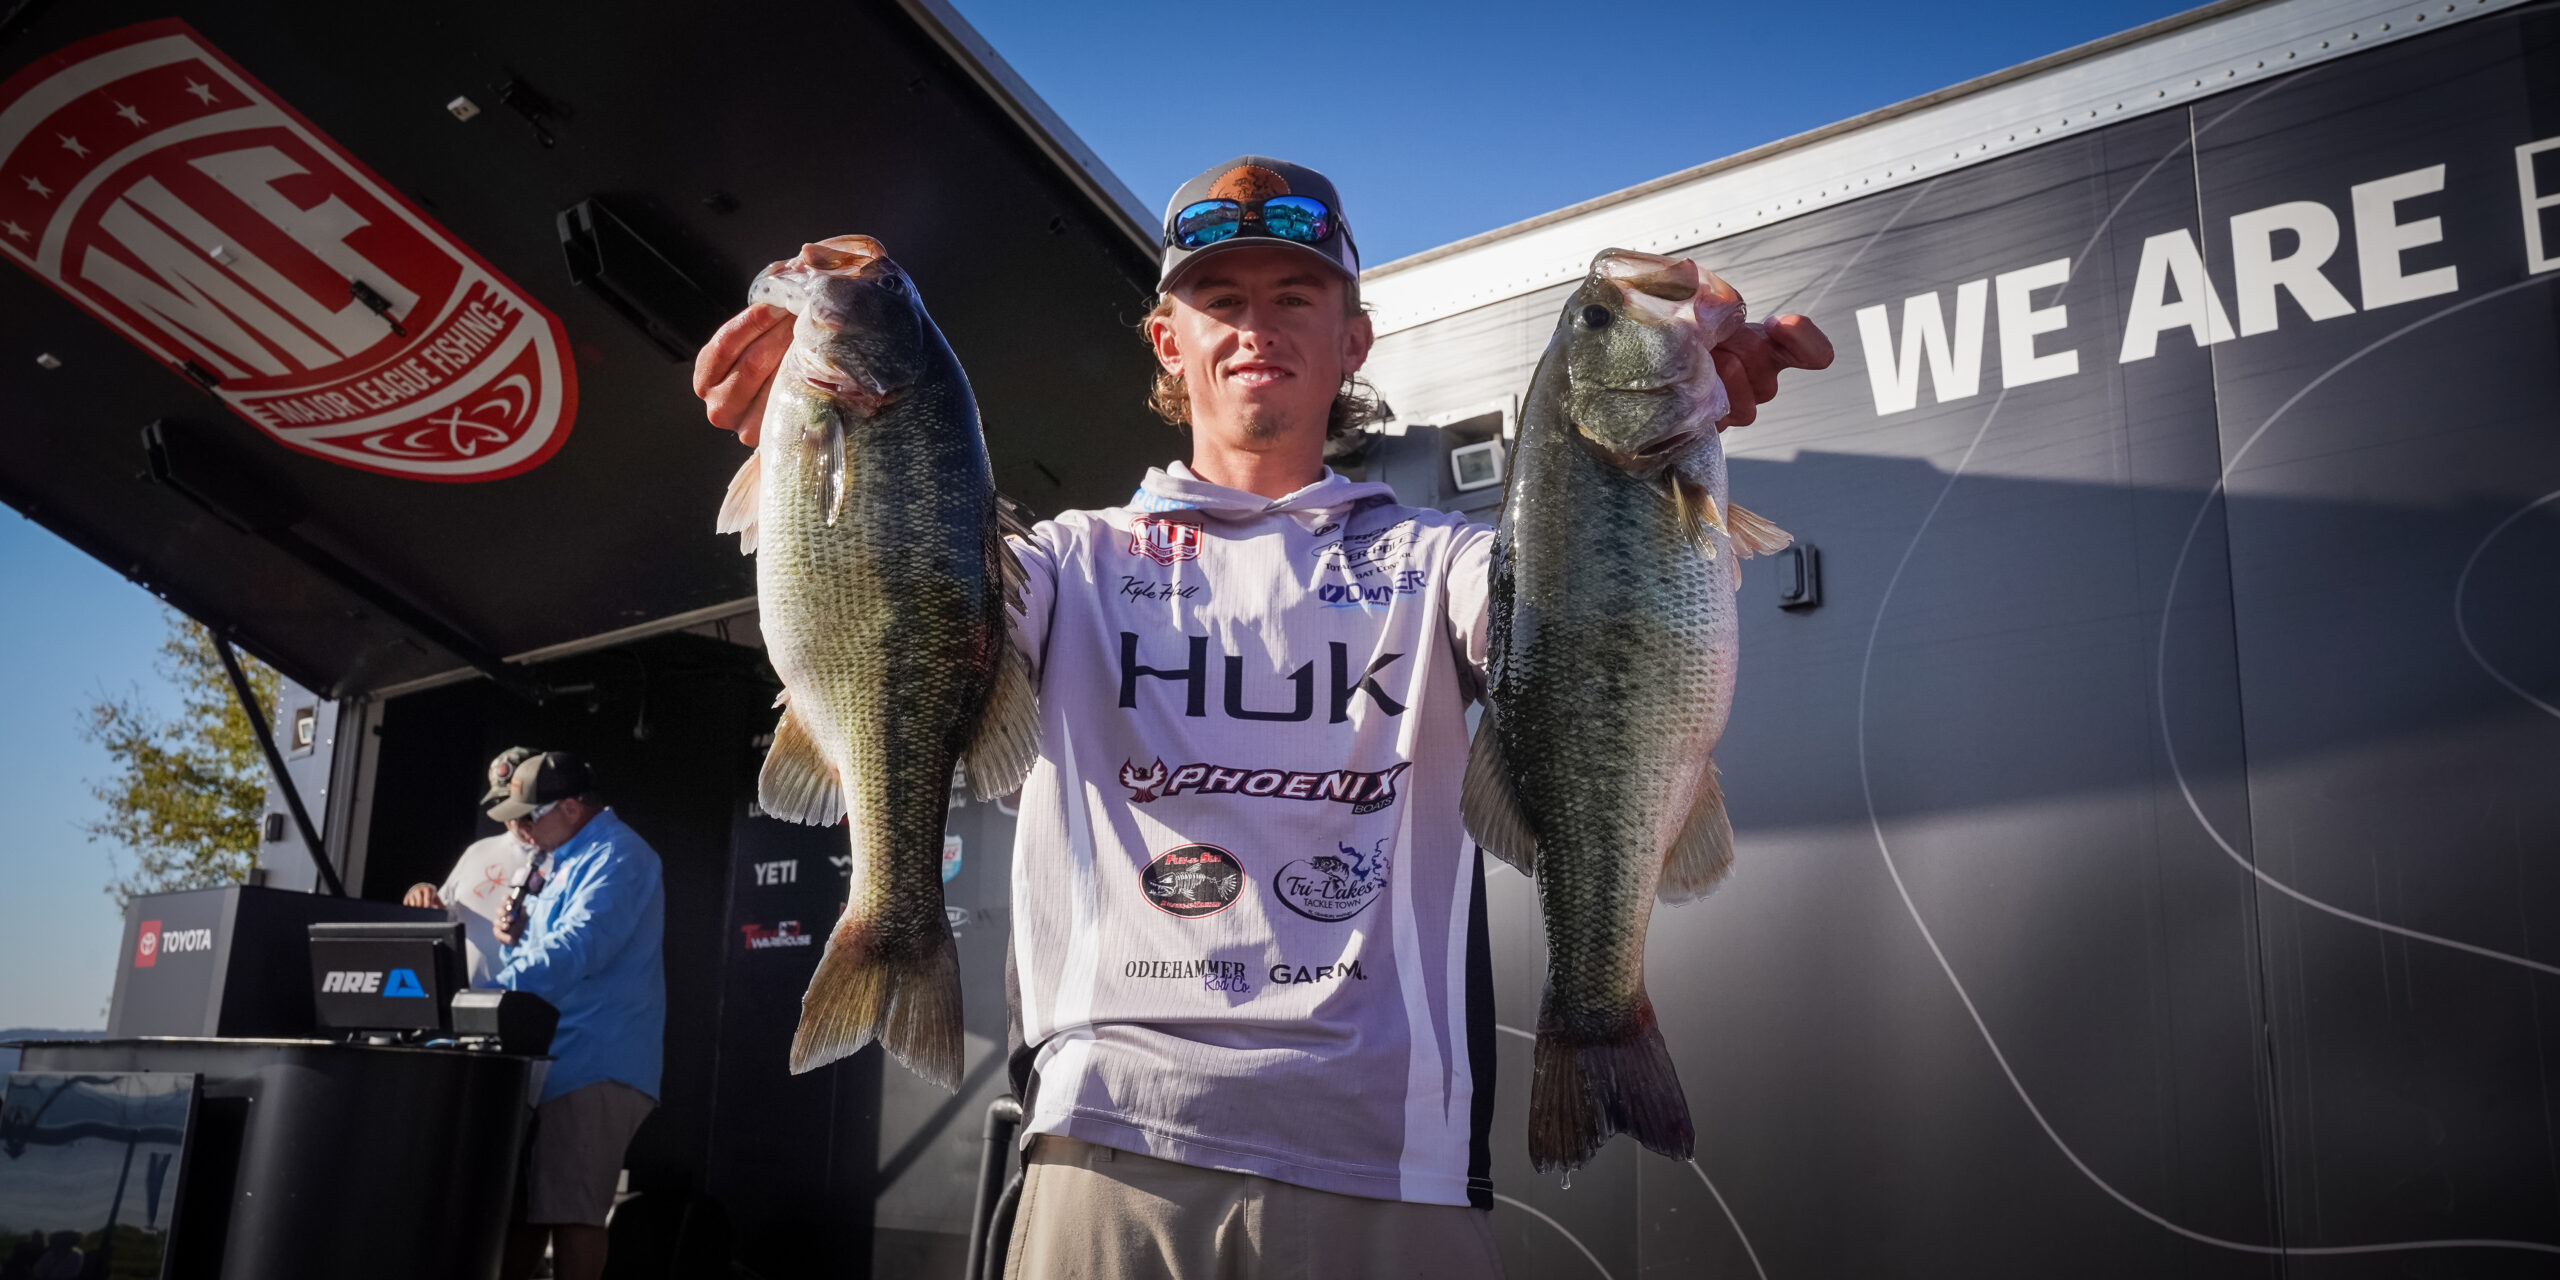 Auburn bass fishing team finishes second in nation after stellar